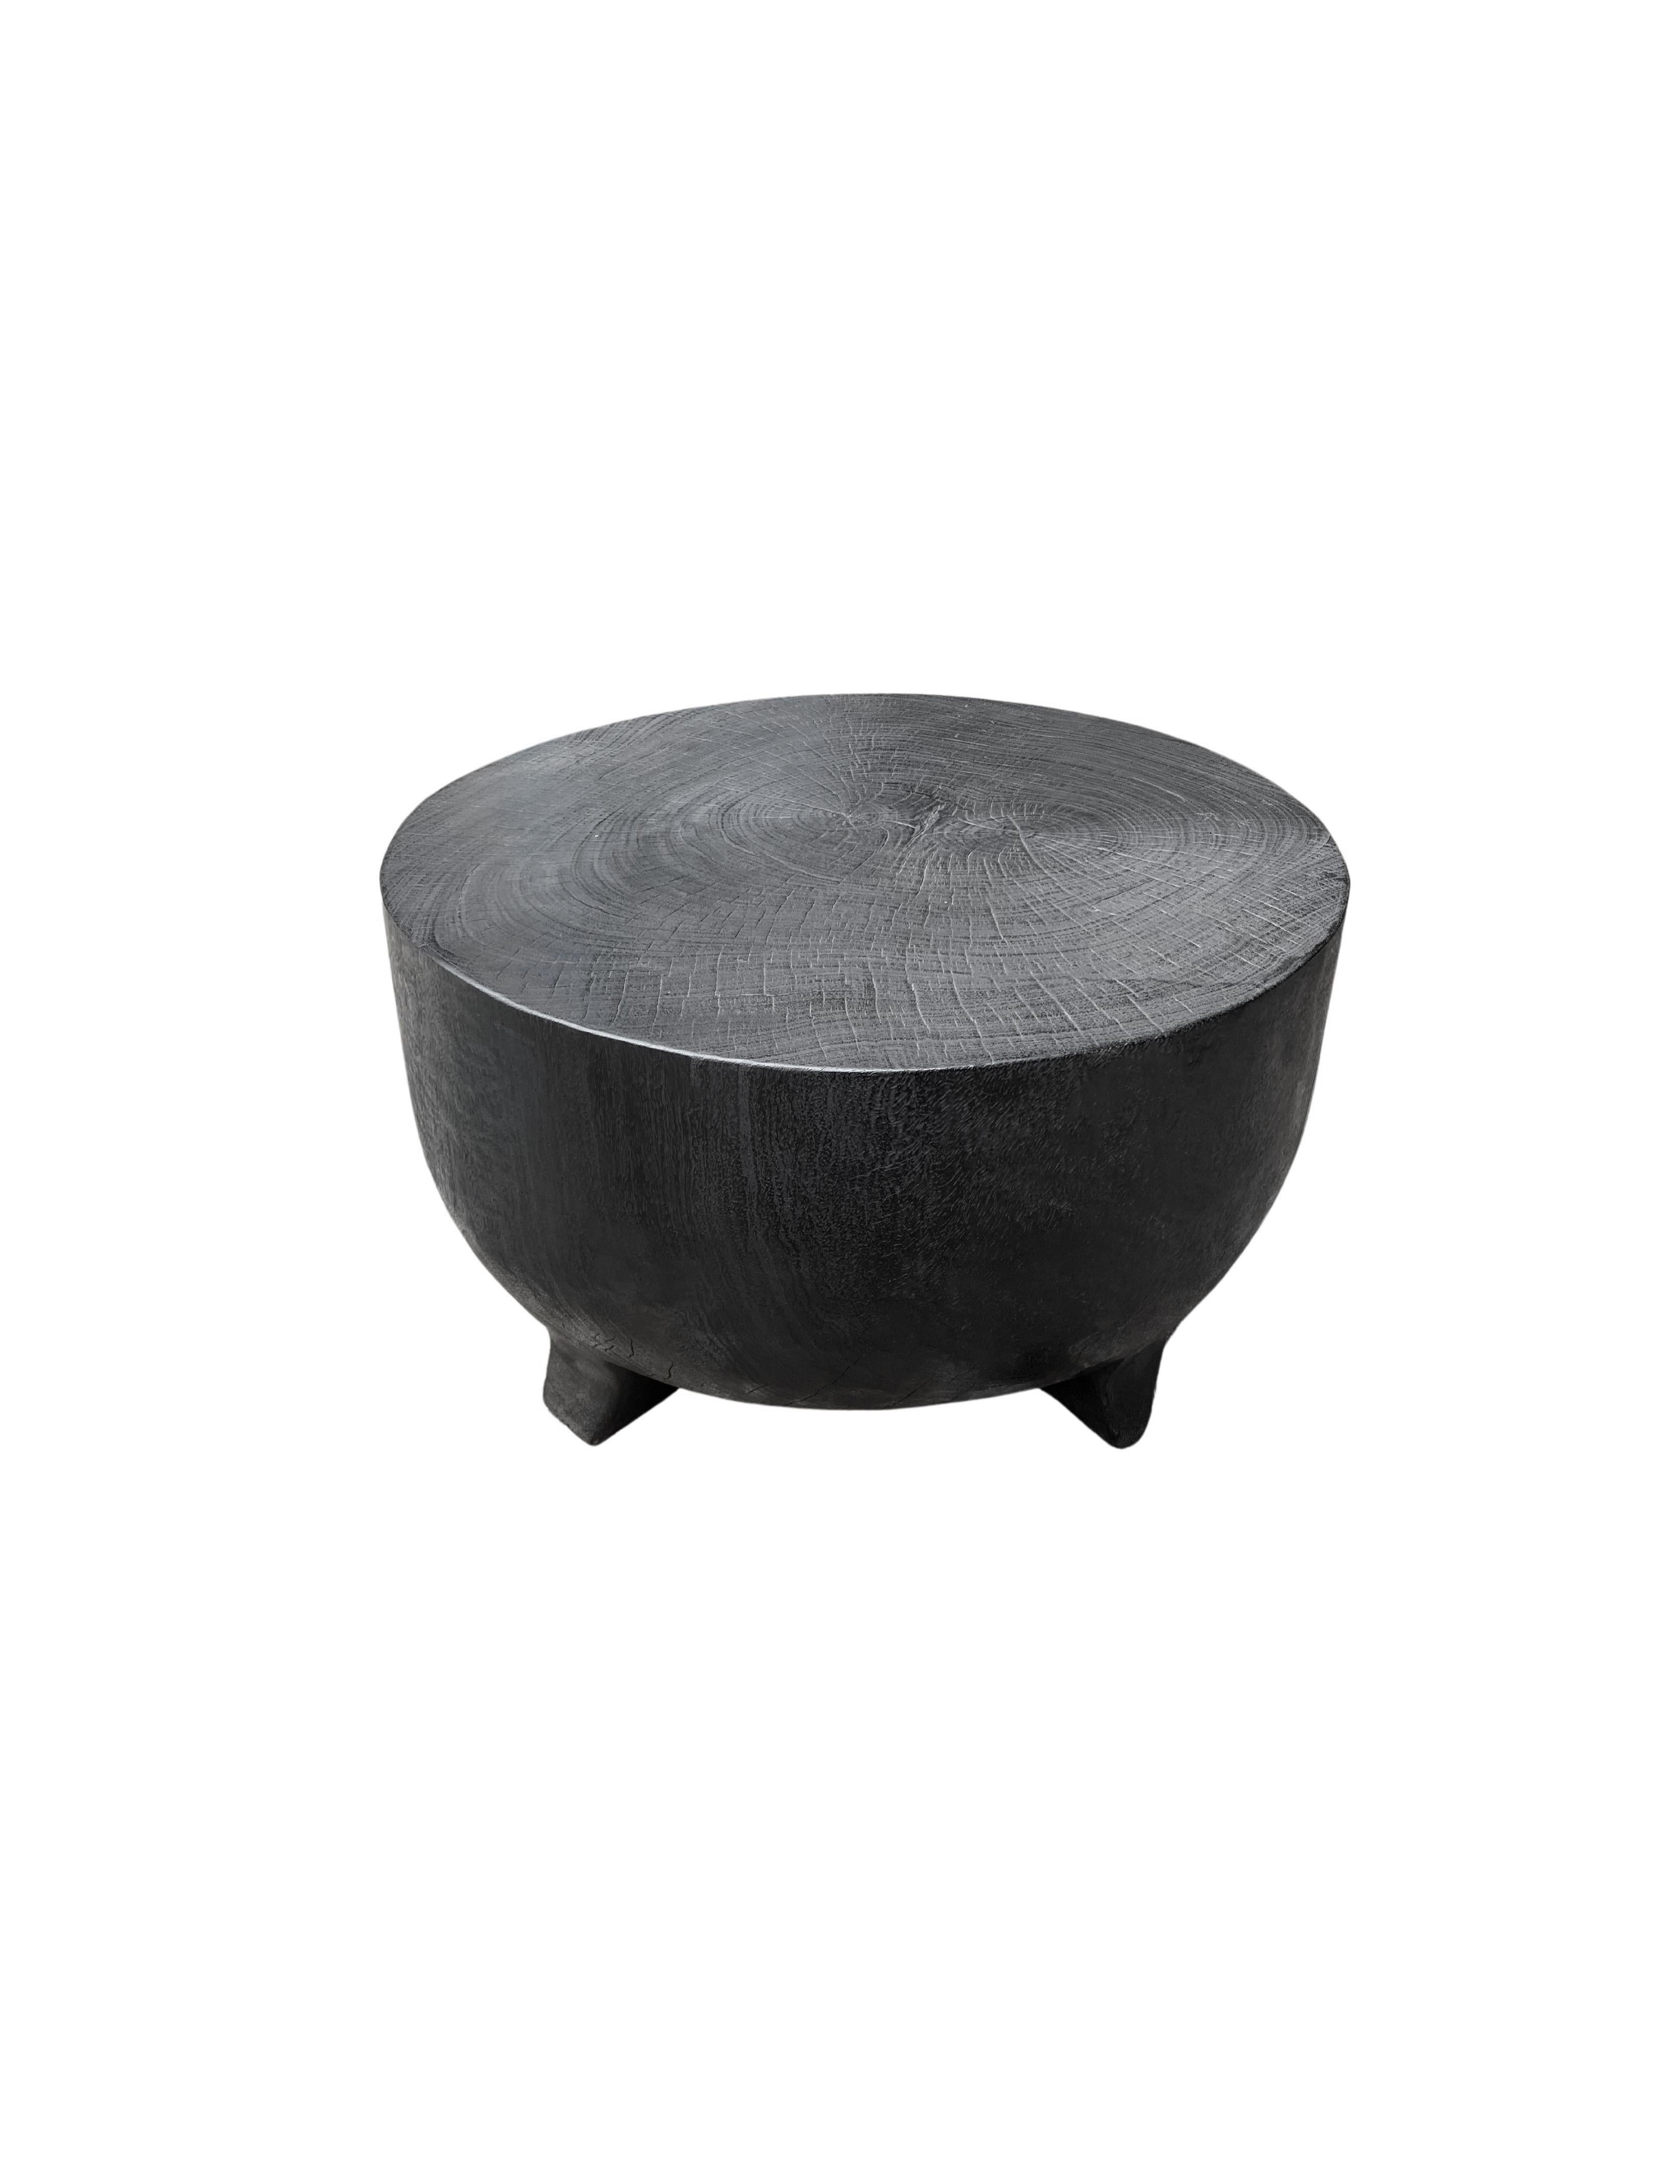 A wonderfully sculptural round side table elevated on four, low and curved legs. Its rich black pigment was achieved through burning the wood three times. Its neutral pigment and subtle wood texture makes it perfect for any space. A uniquely